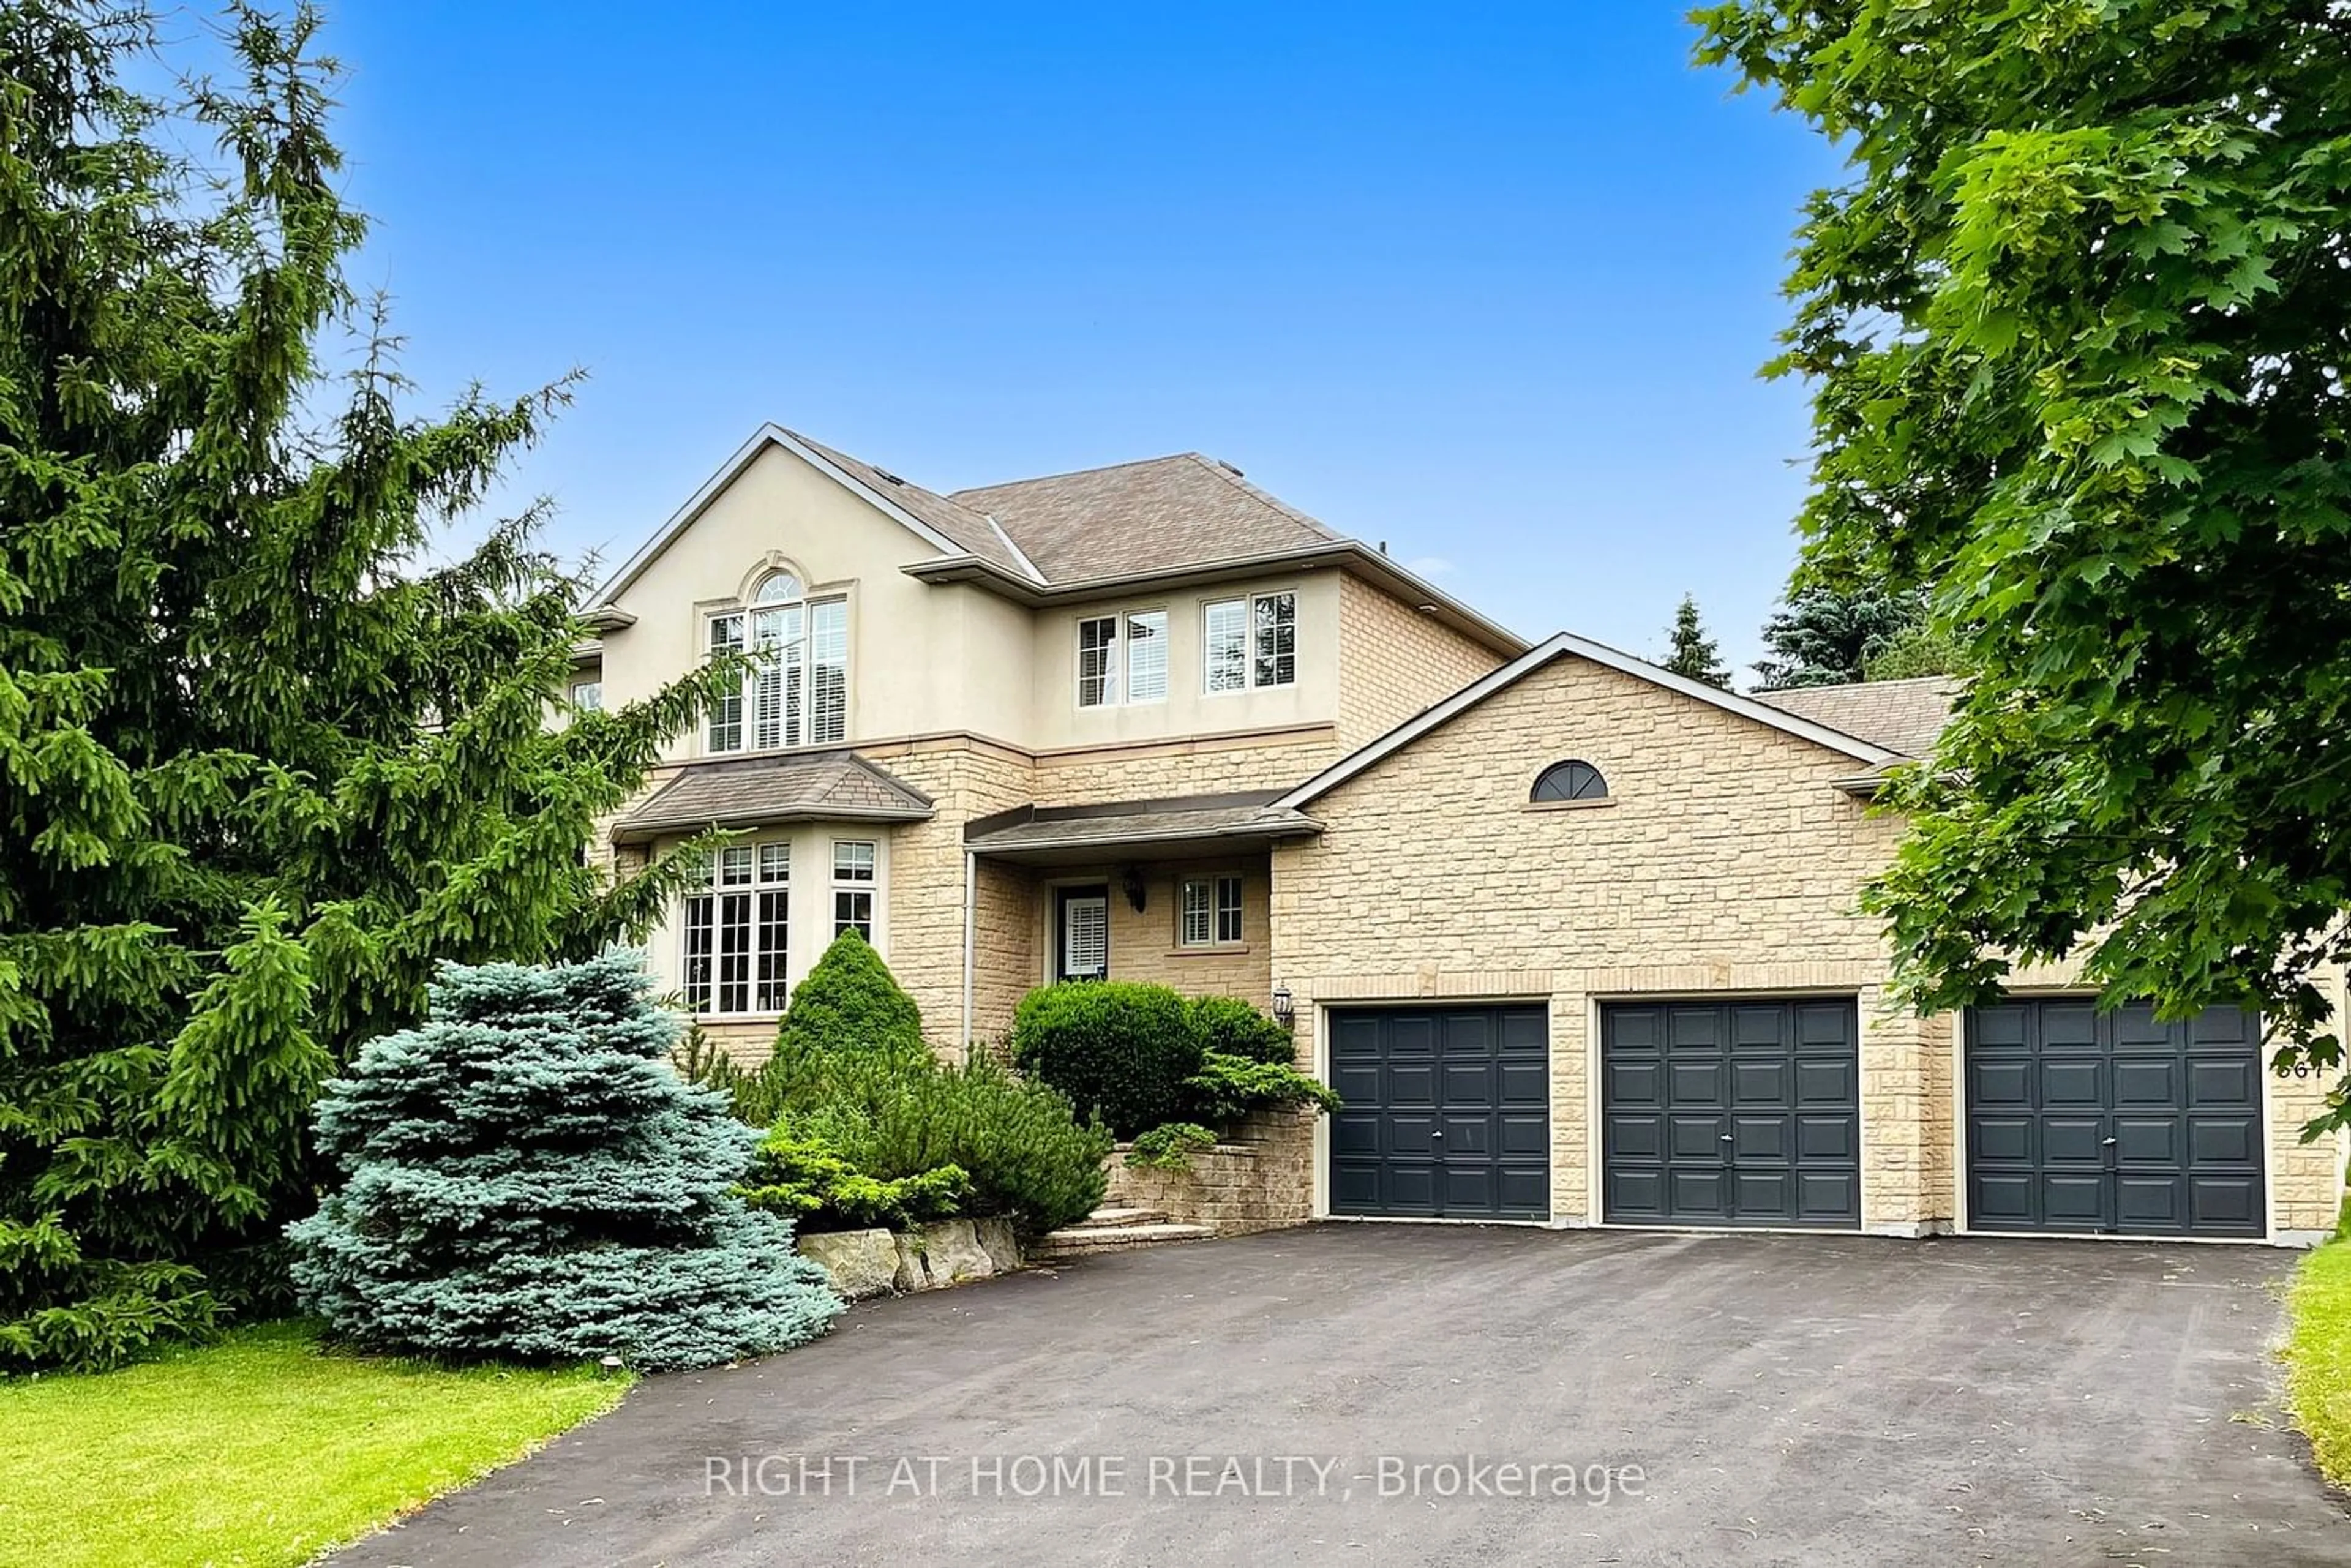 Home with brick exterior material for 667 St  John's Sdrd, Aurora Ontario L4G 0N2